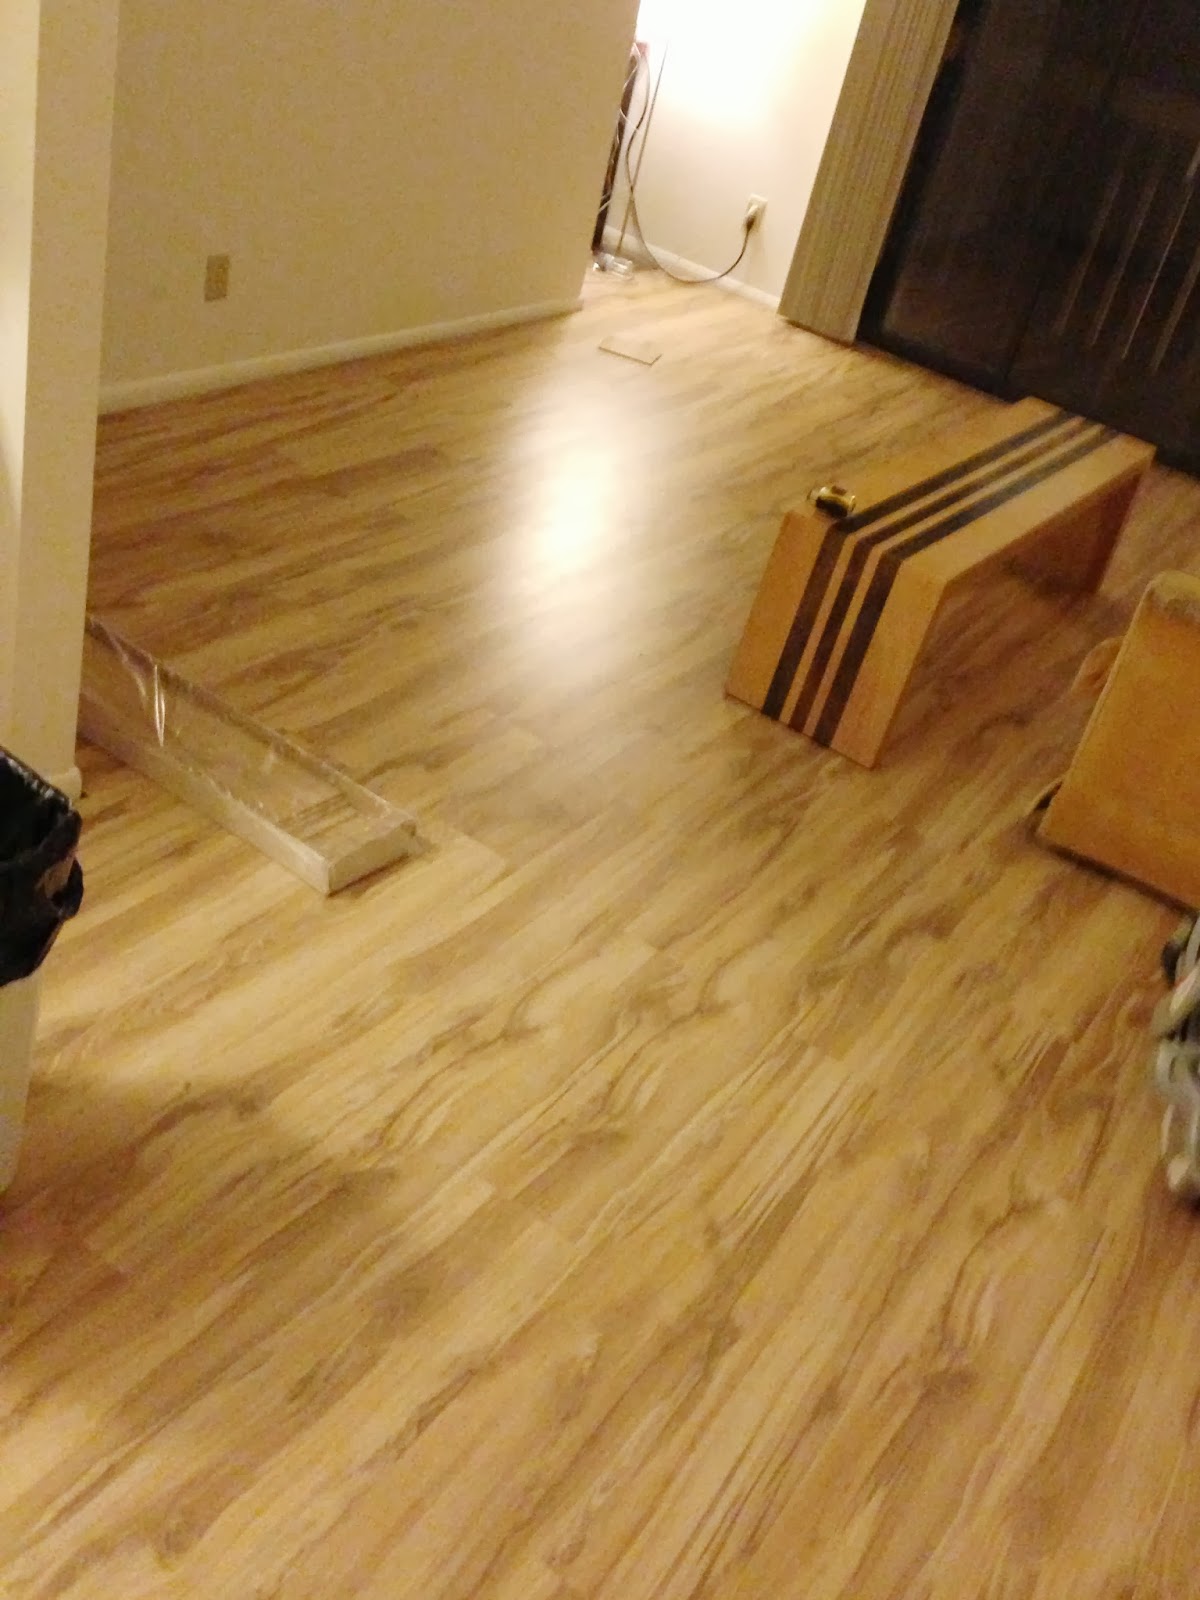 How We Put Hardwood Over Carpet Messymom, What Kind Of Rugs Can You Use On Laminate Floors